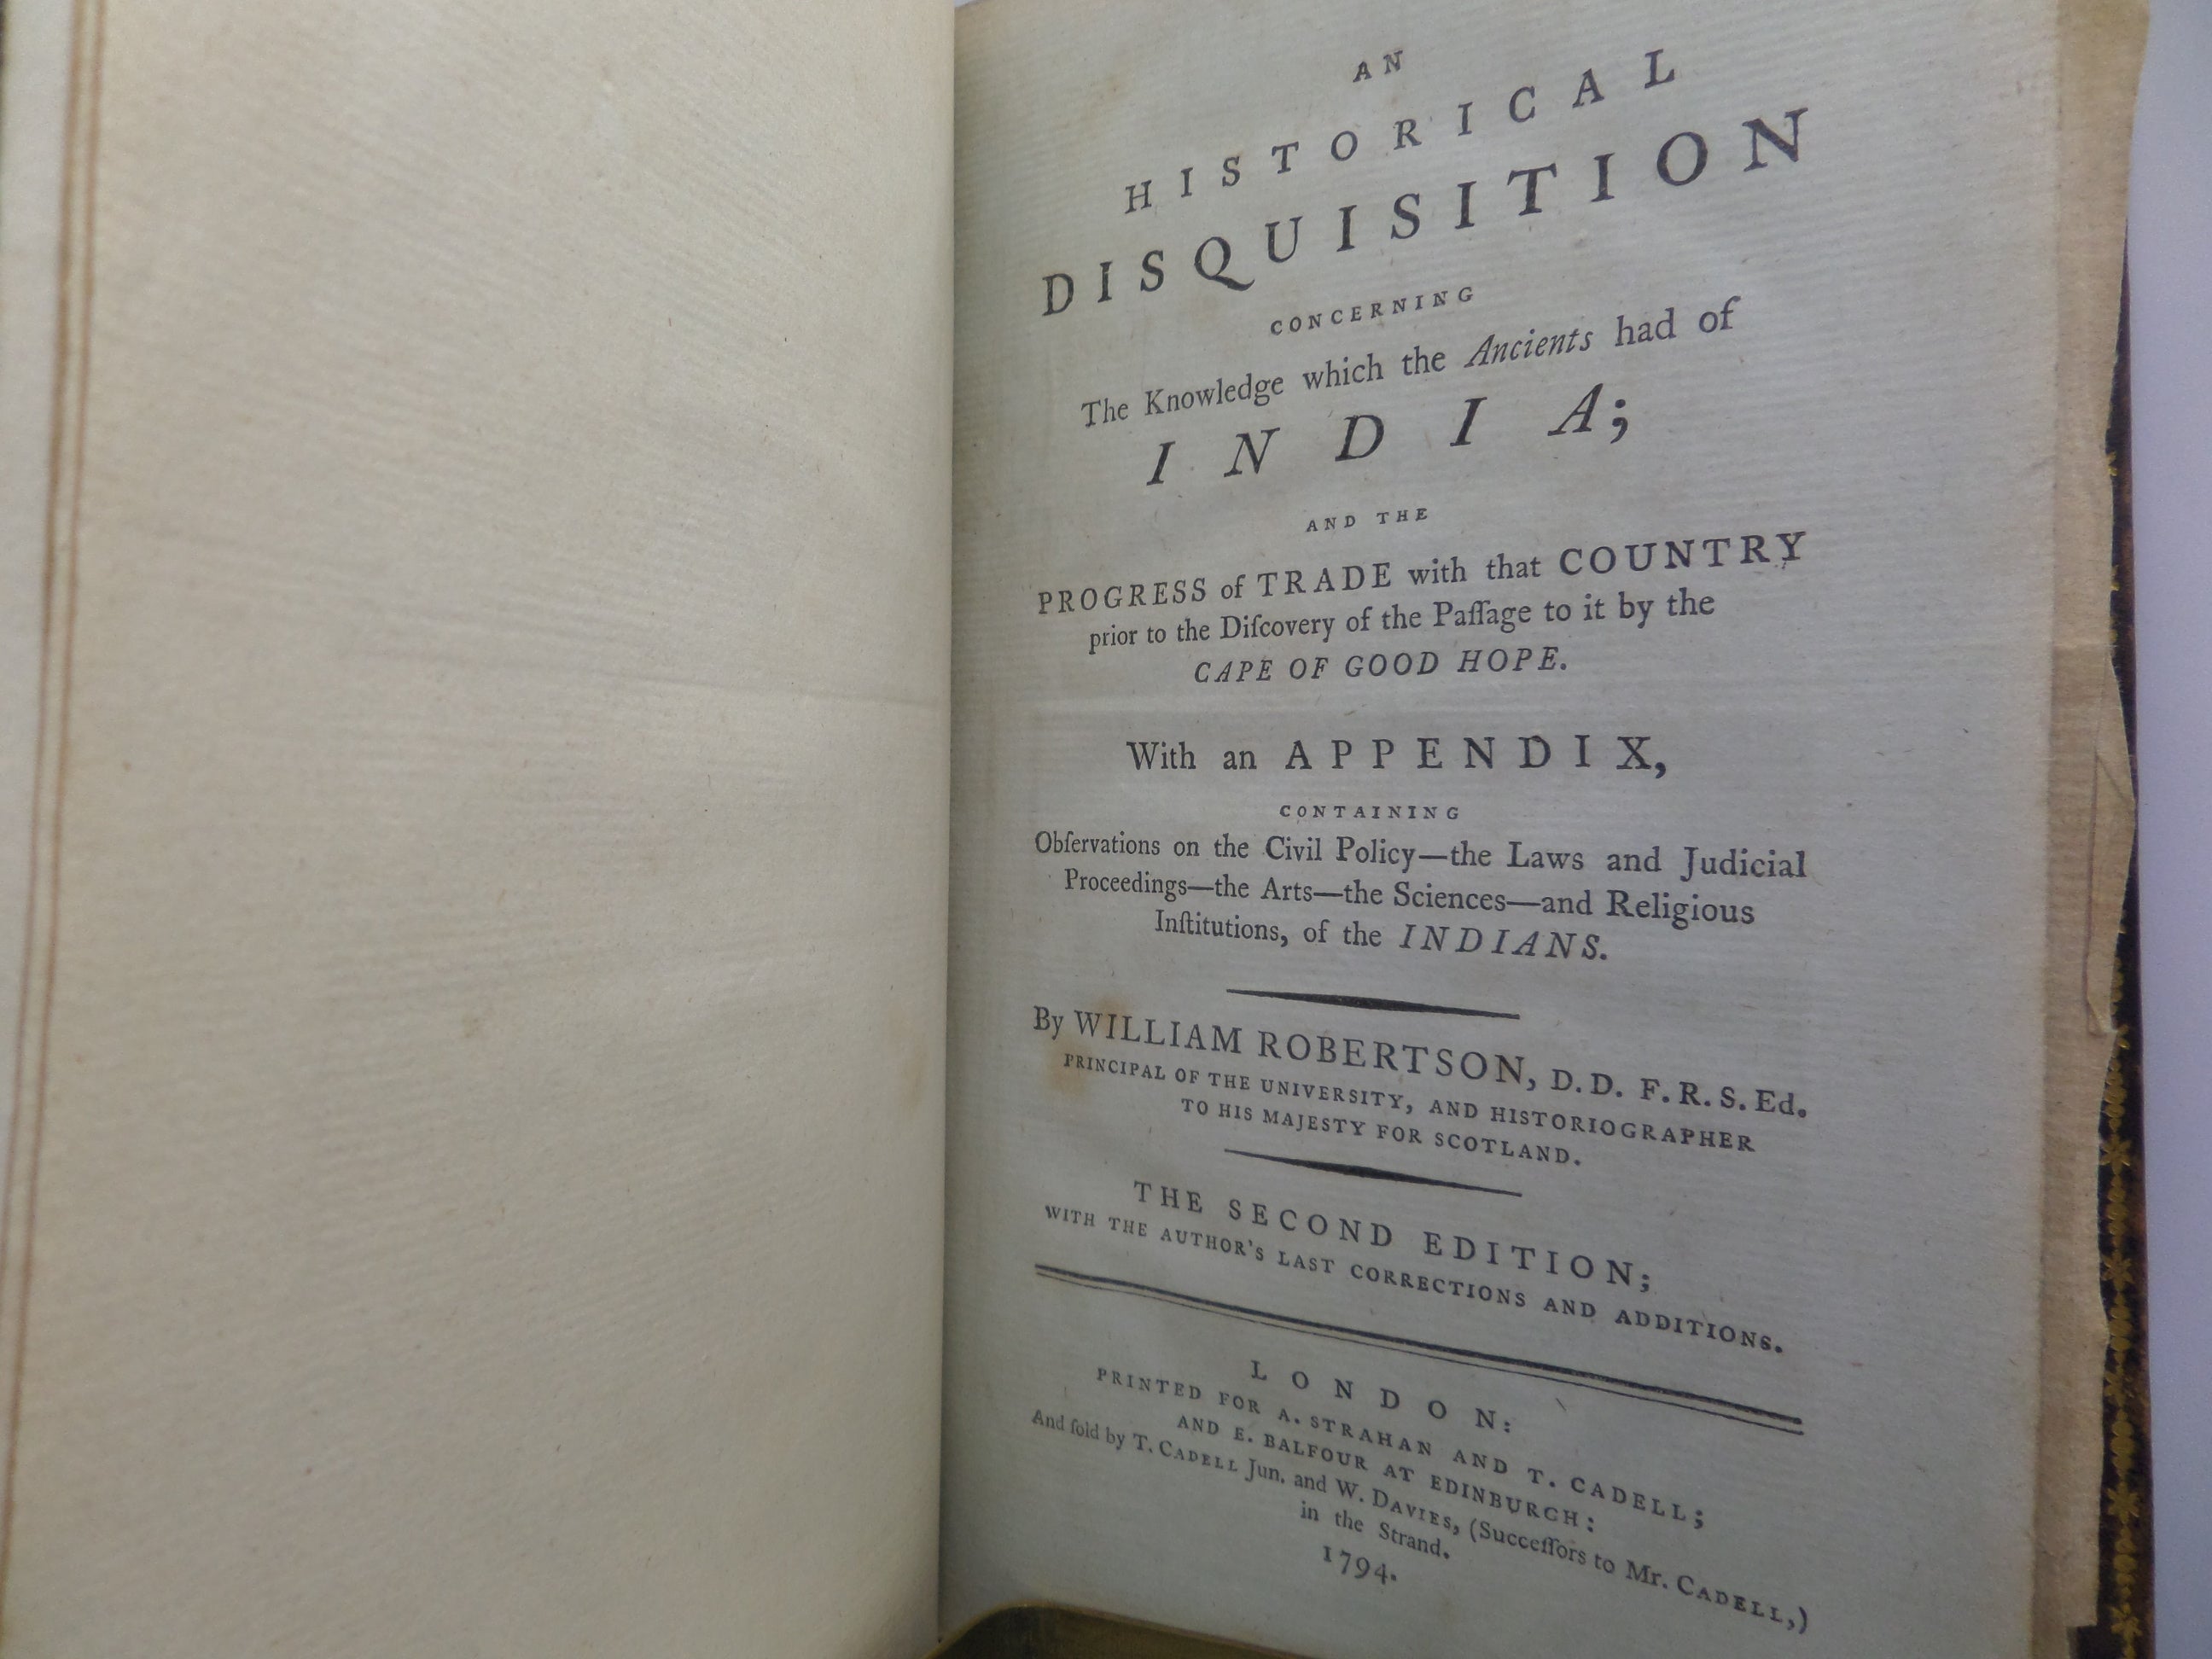 AN HISTORICAL DISQUISITION CONCERNING INDIA BY WILLIAM ROBERTSON 1794 SECOND EDITION